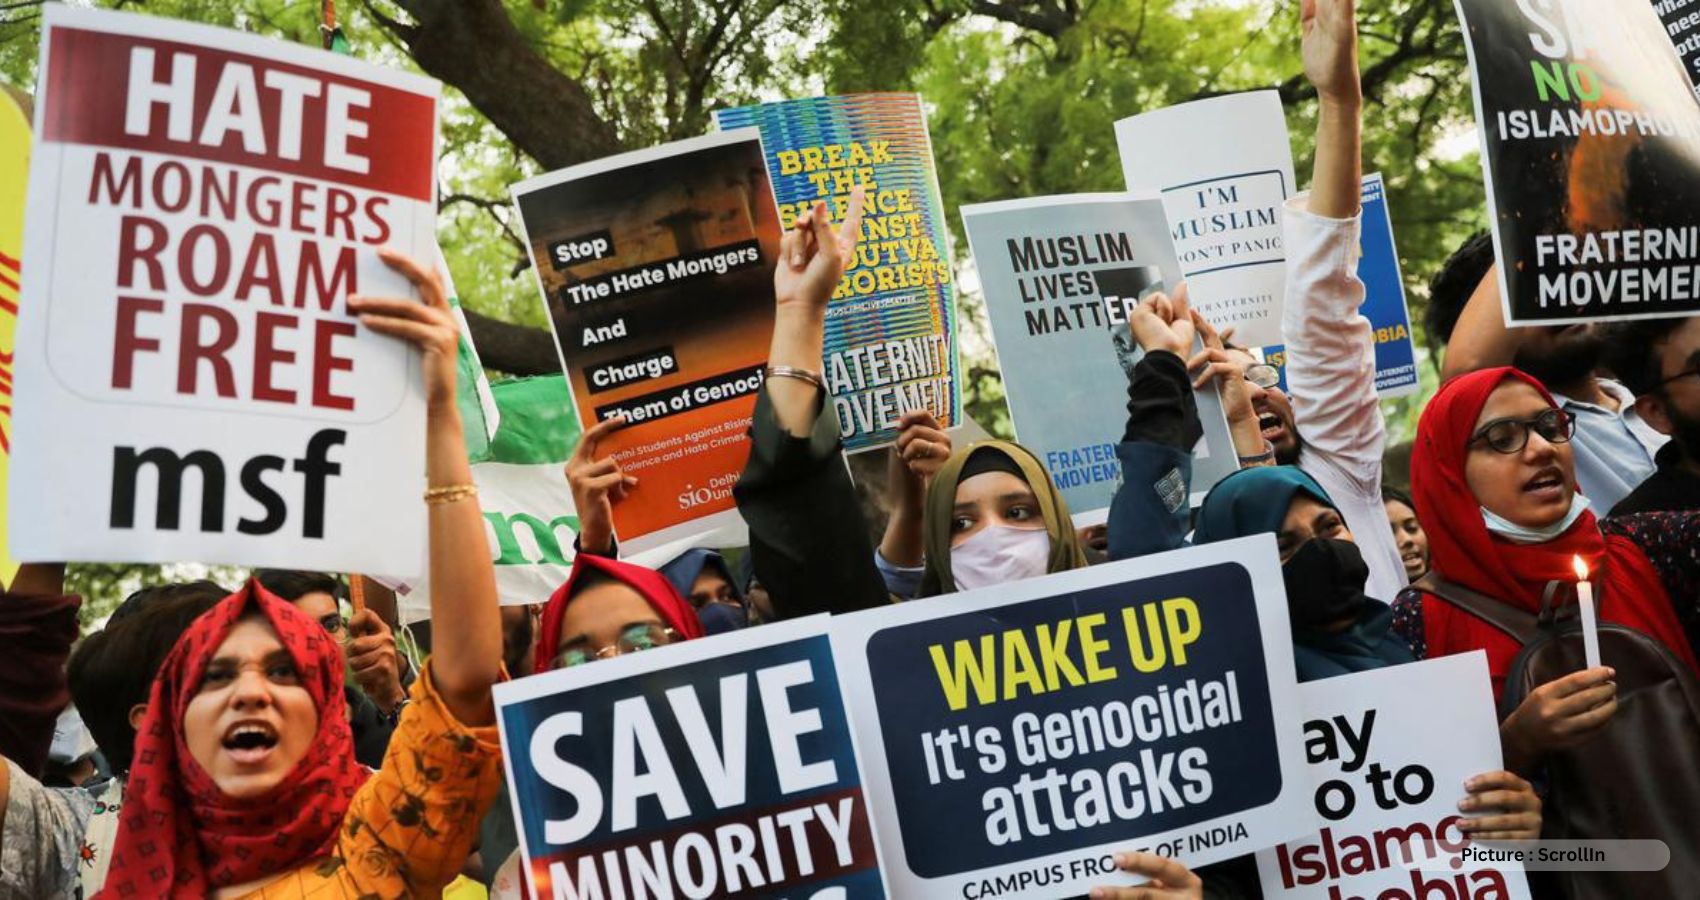 US Calls Out Attacks And Home Demolitions Of Minorities In India